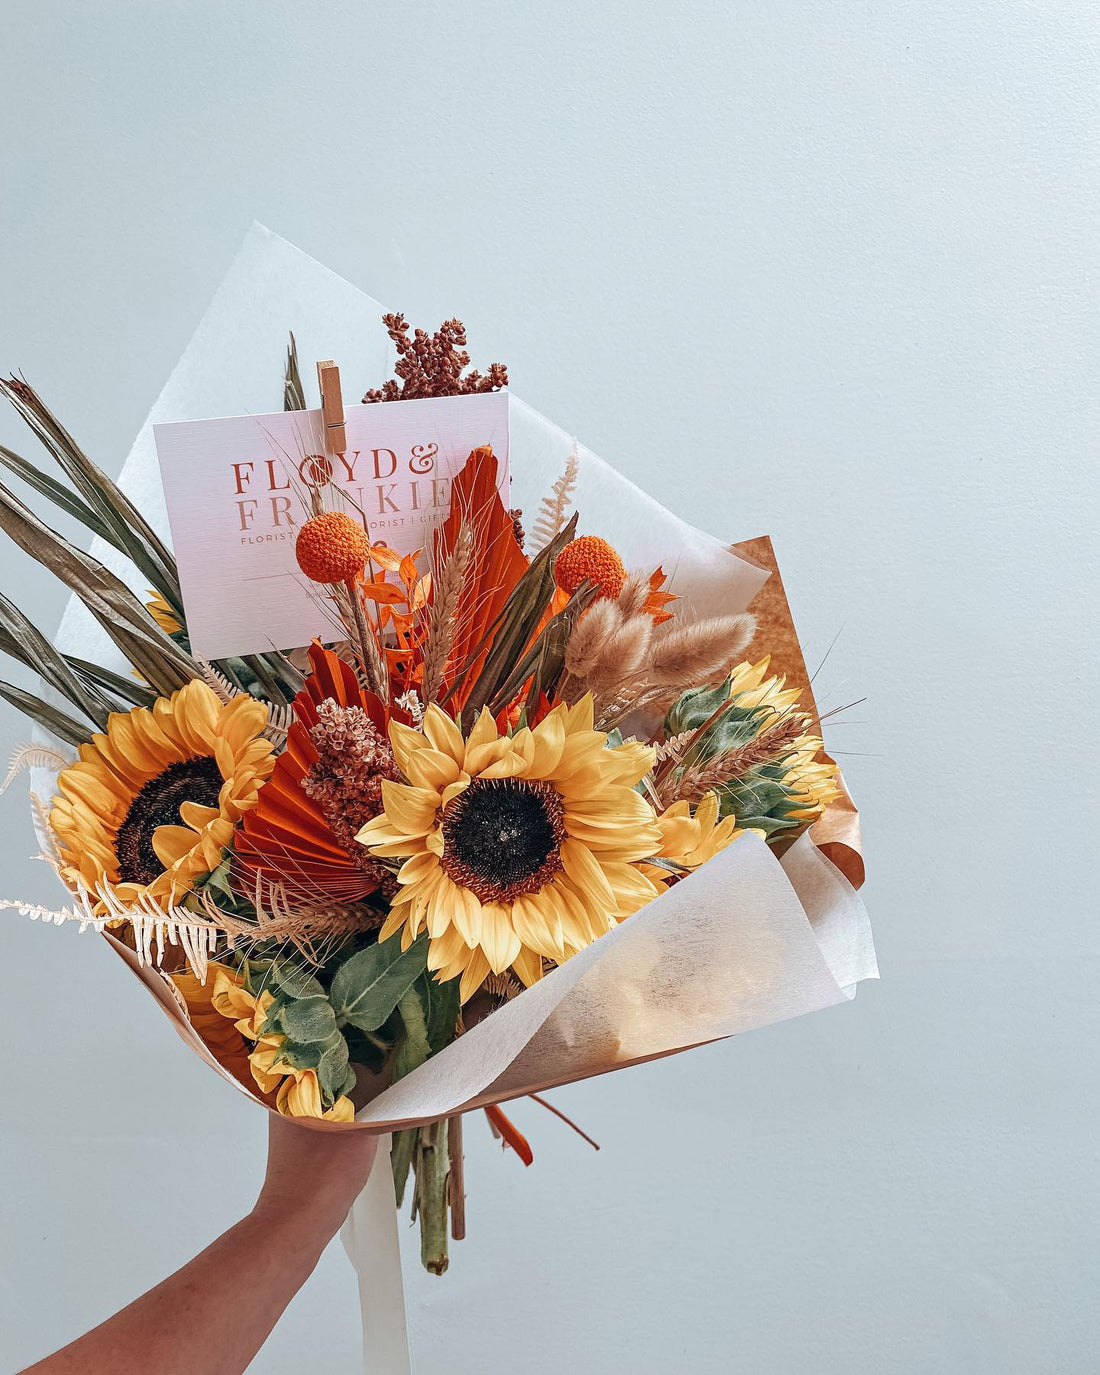 Fridays are for boho sunflower bouquets 🌻